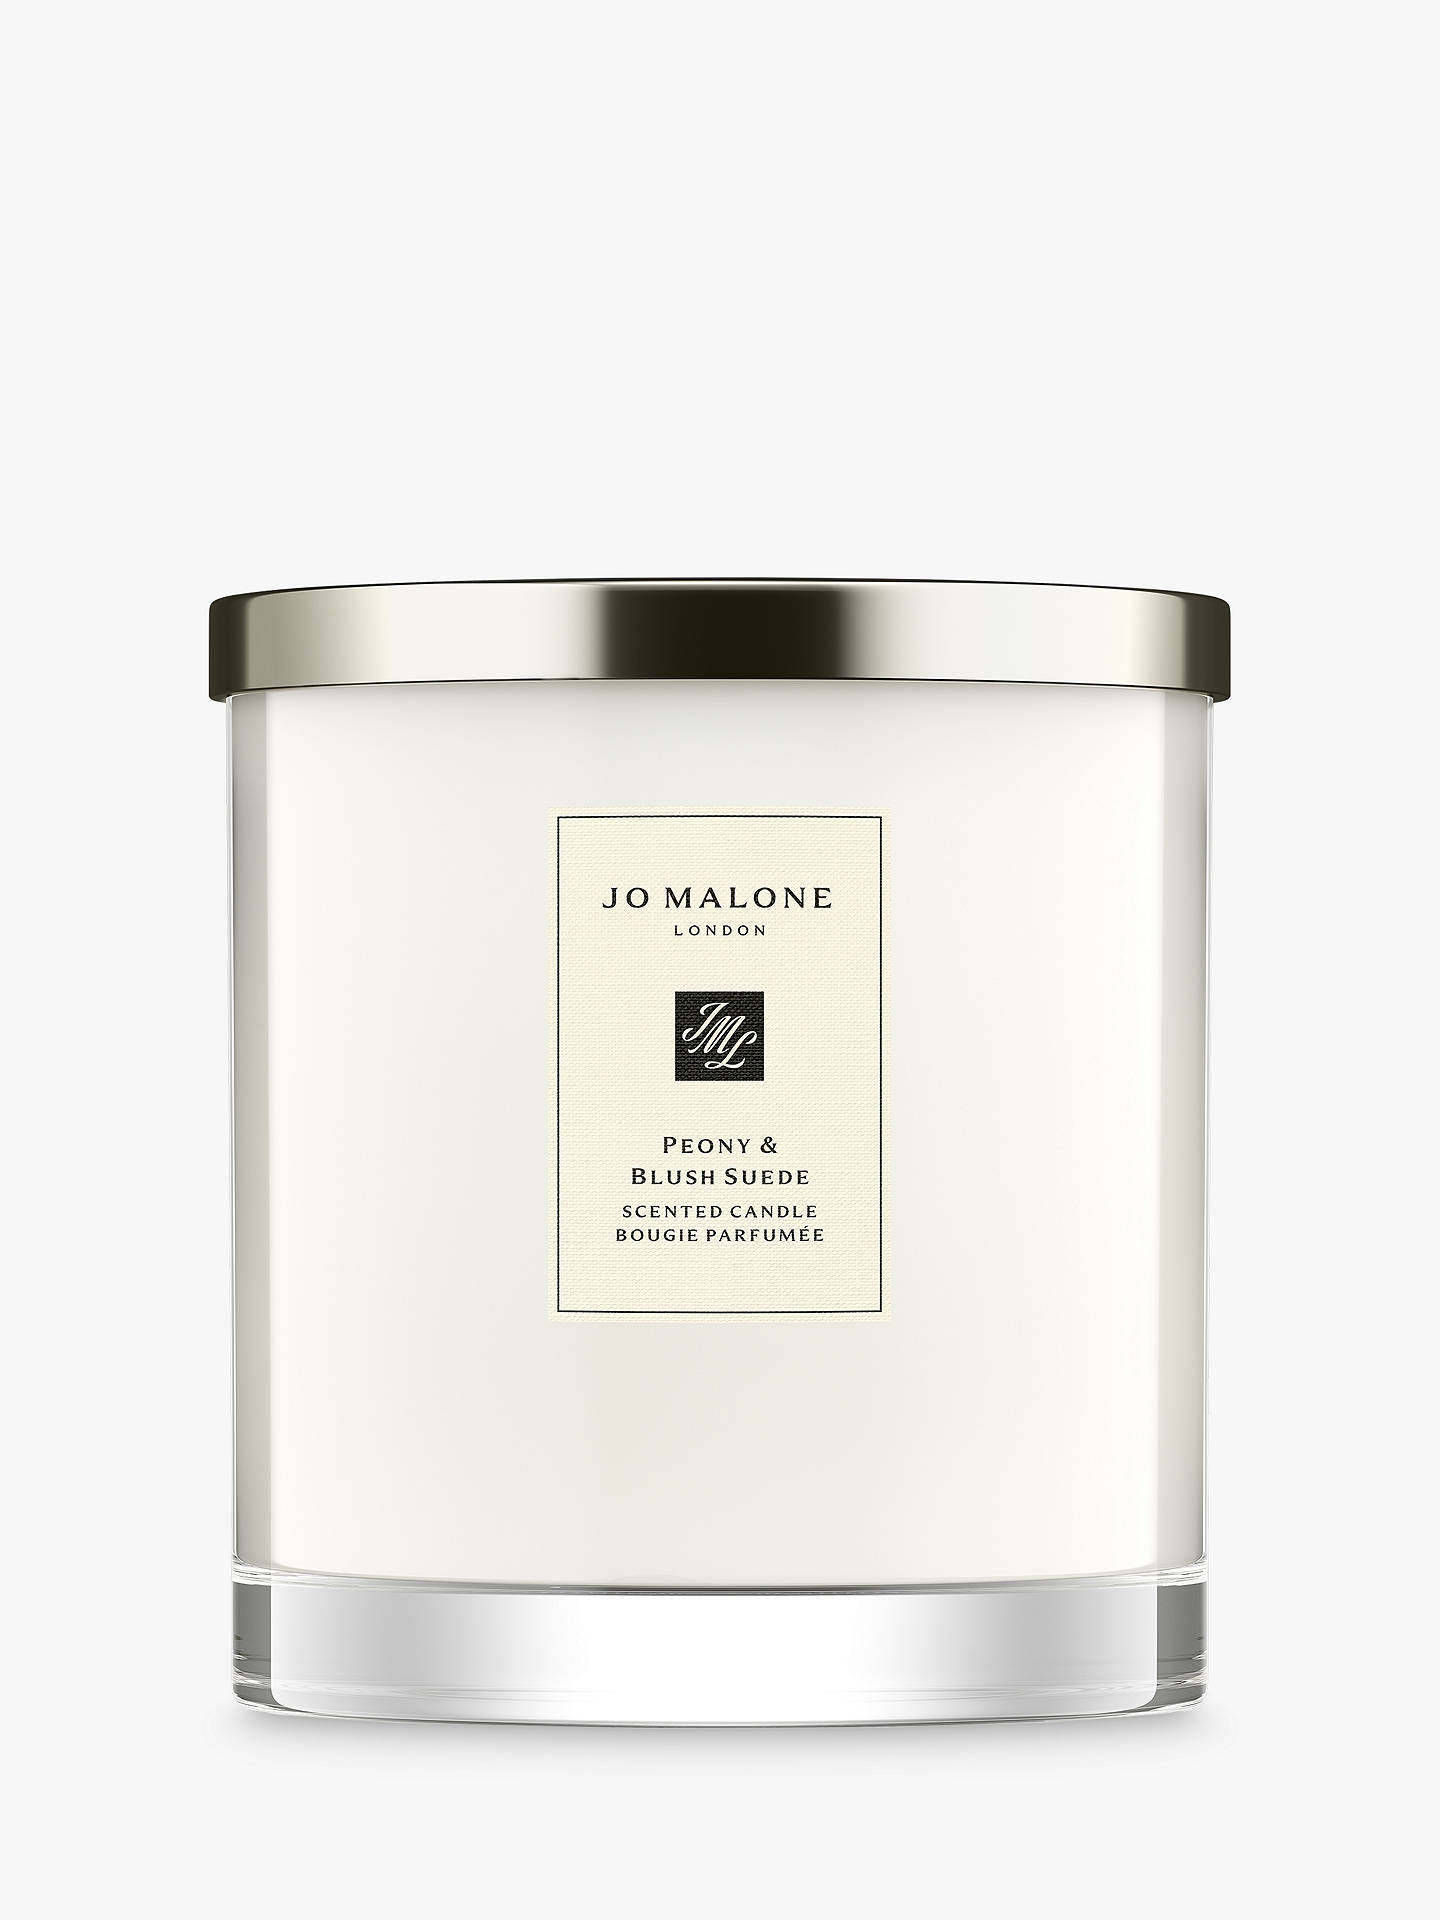 Jo Malone London Peony & Blush Suede Luxury Scented Candle, 2.5kg at ...